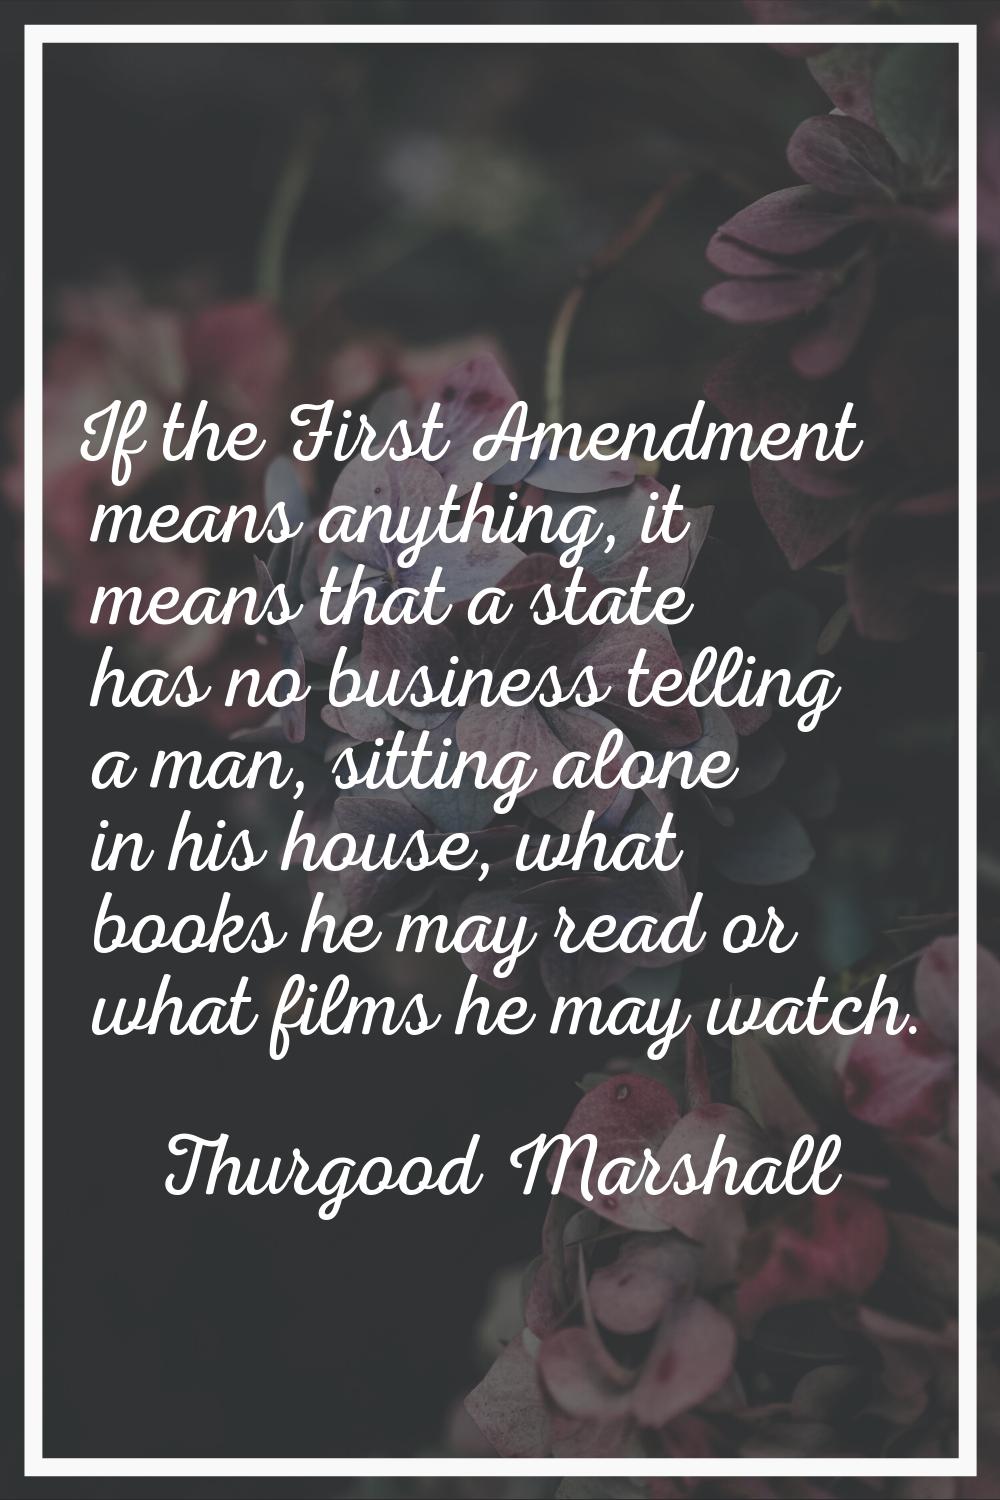 If the First Amendment means anything, it means that a state has no business telling a man, sitting